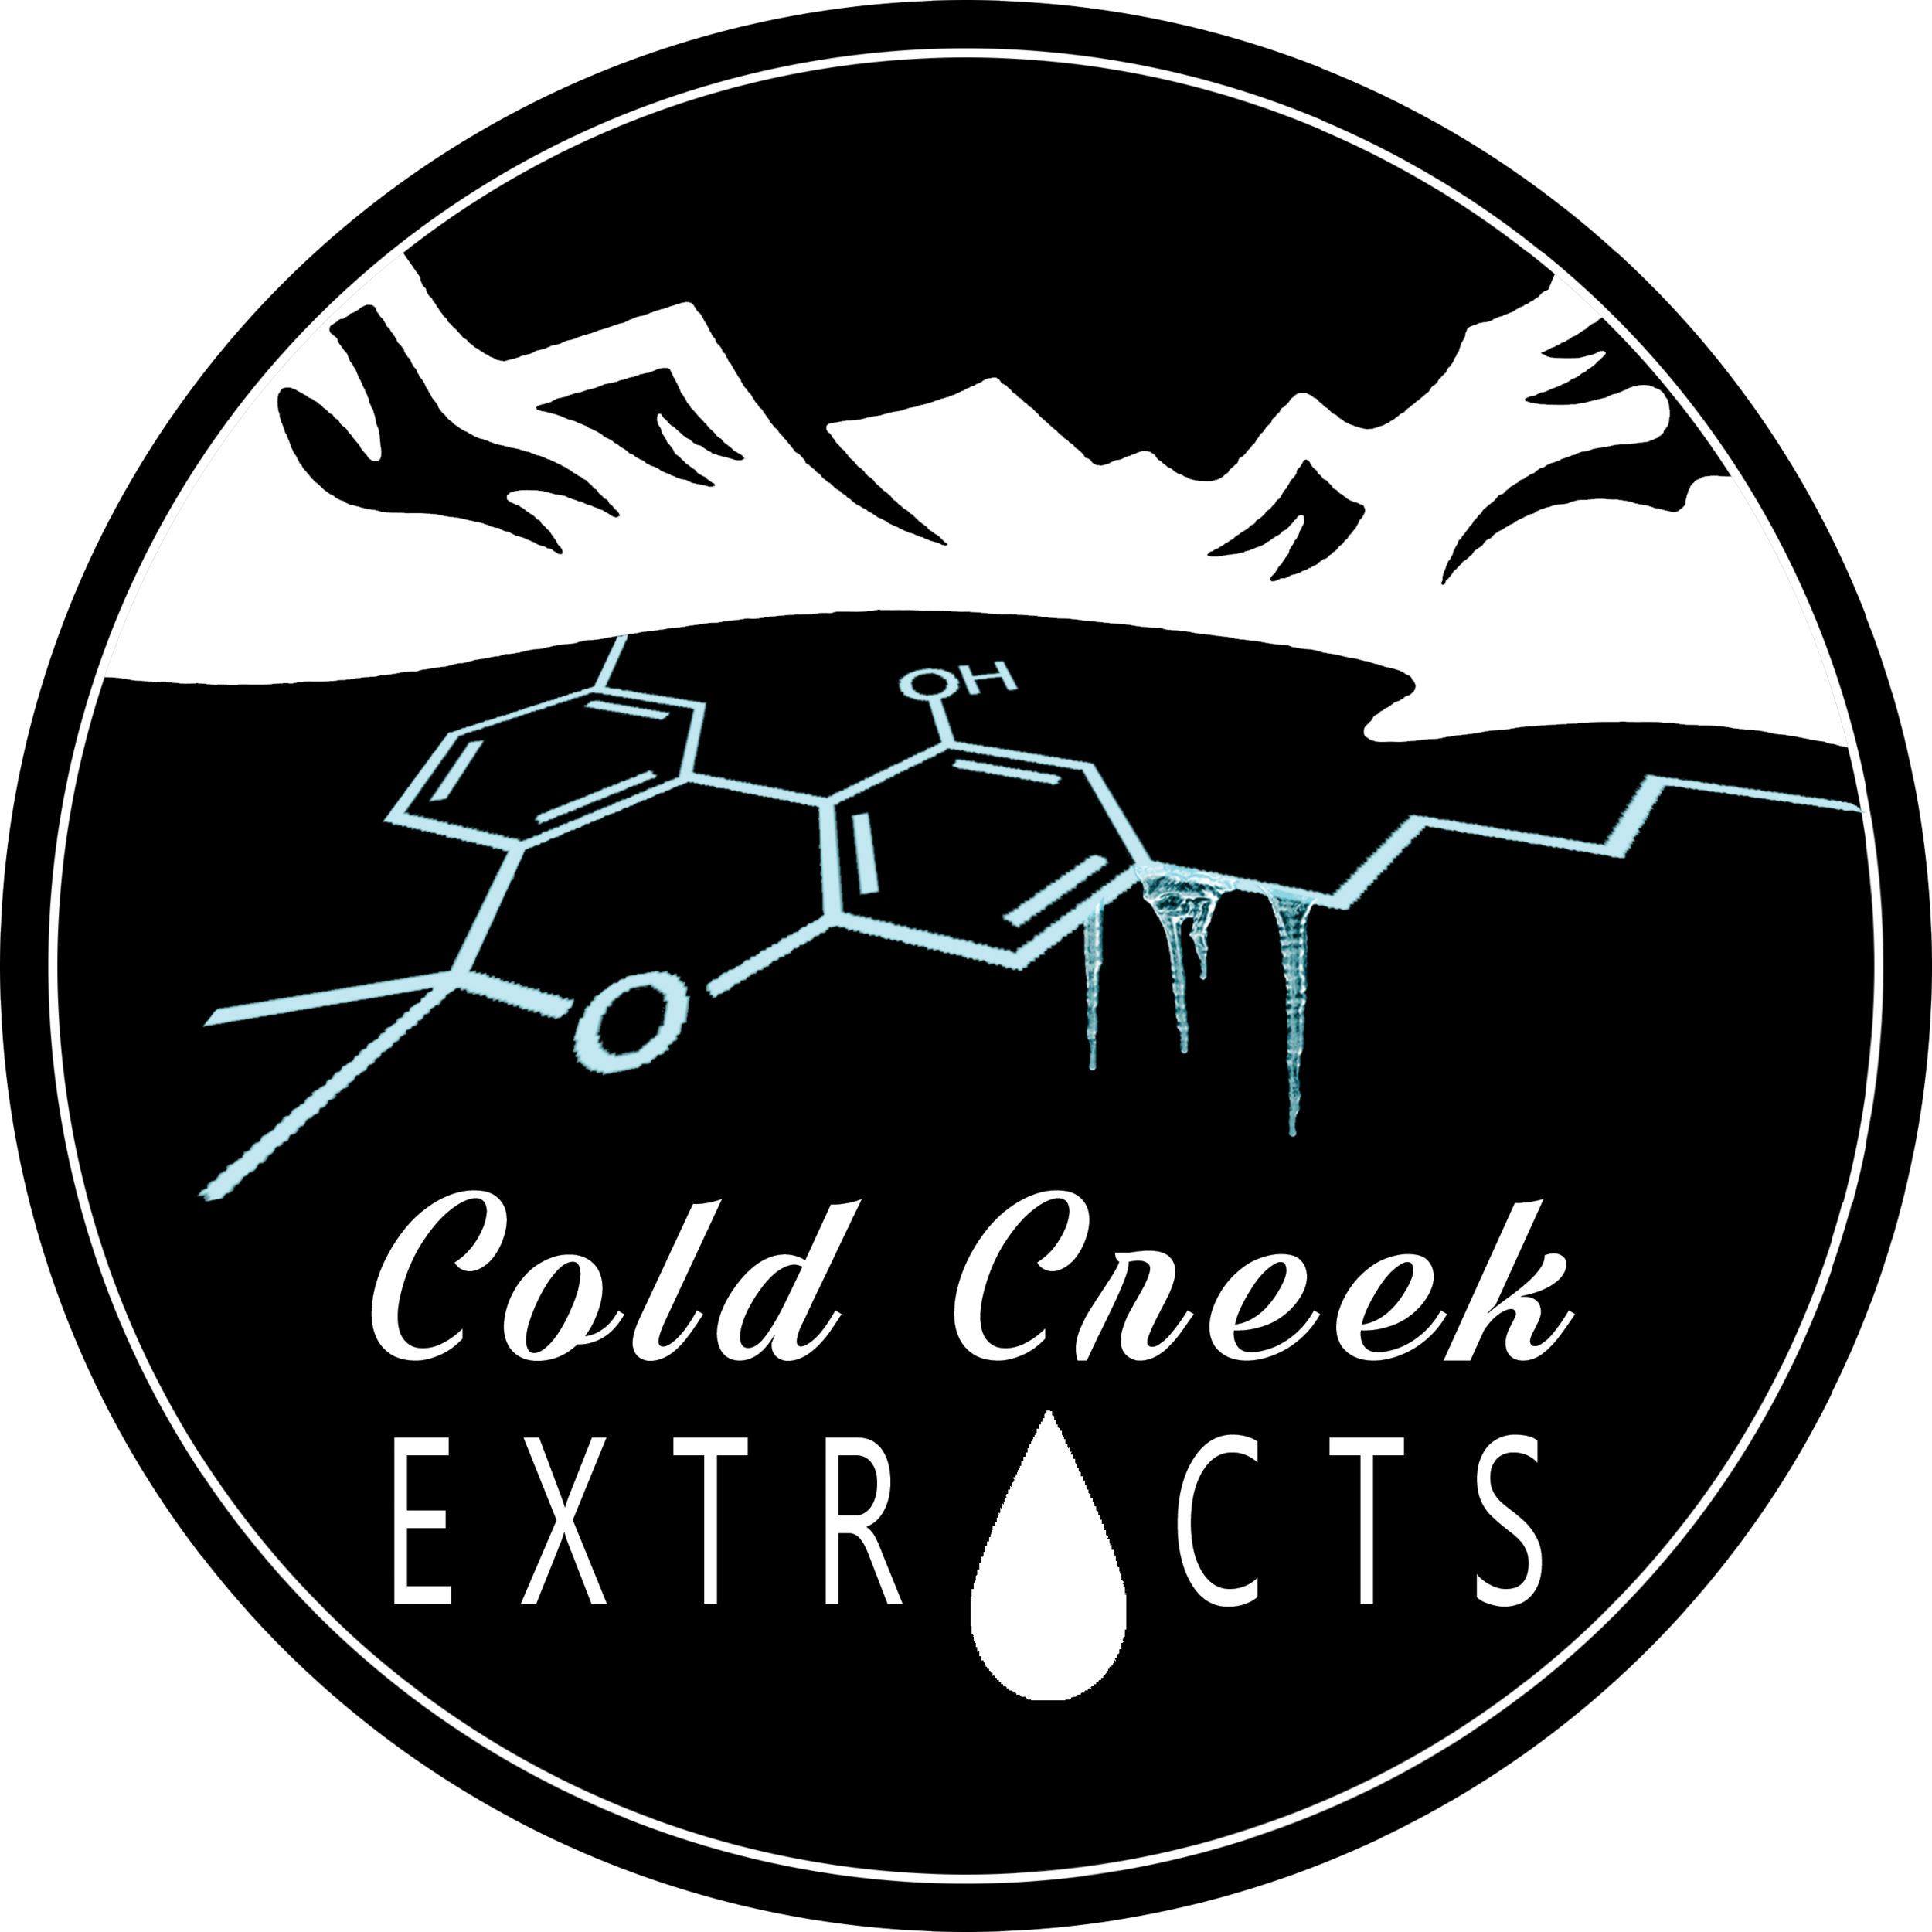 Cold Creek Extracts